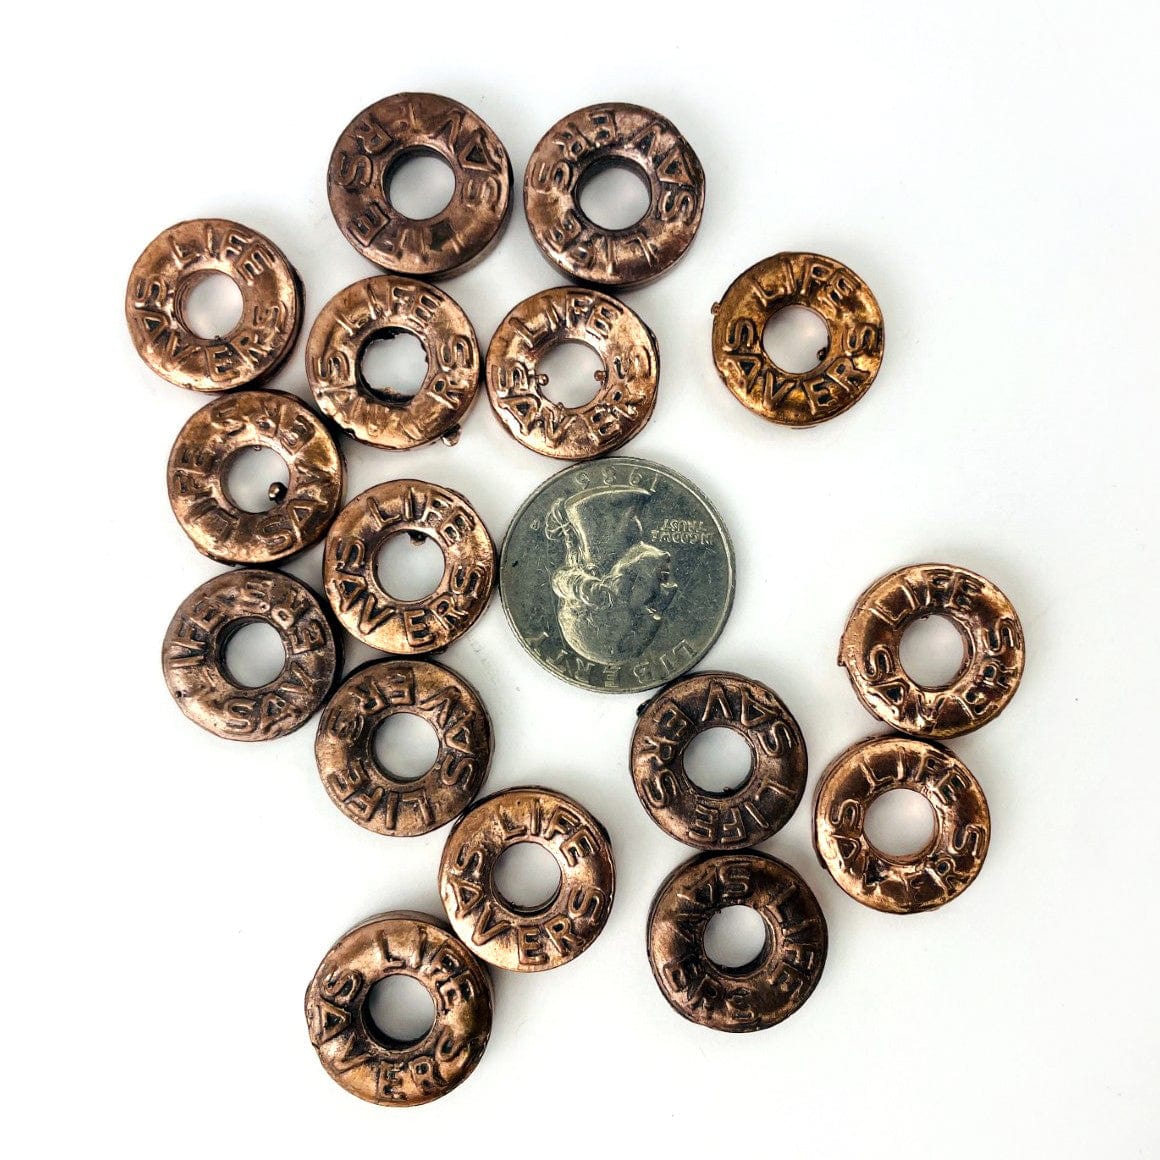 Copper Life Saver Pendant with a quarter for size reference